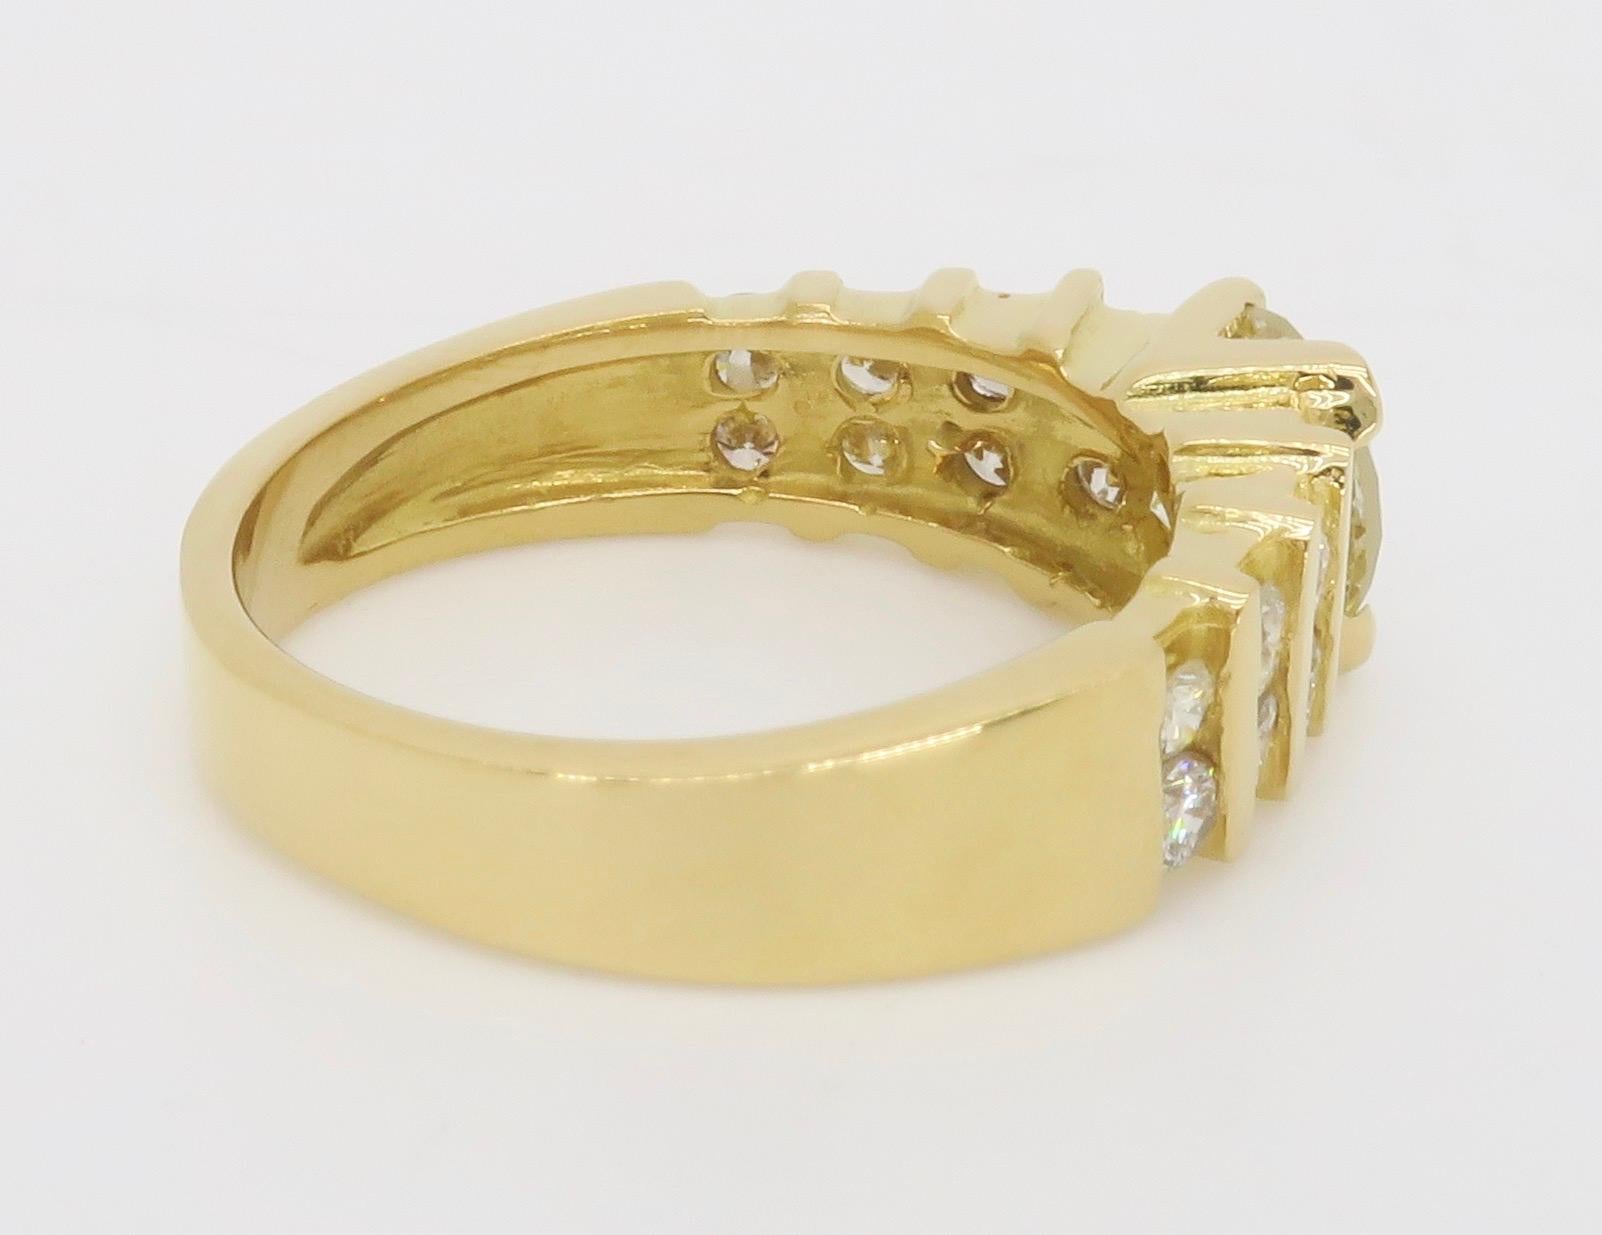 1.54ctw Diamond Encrusted Ring in 14k Yellow Gold For Sale 3